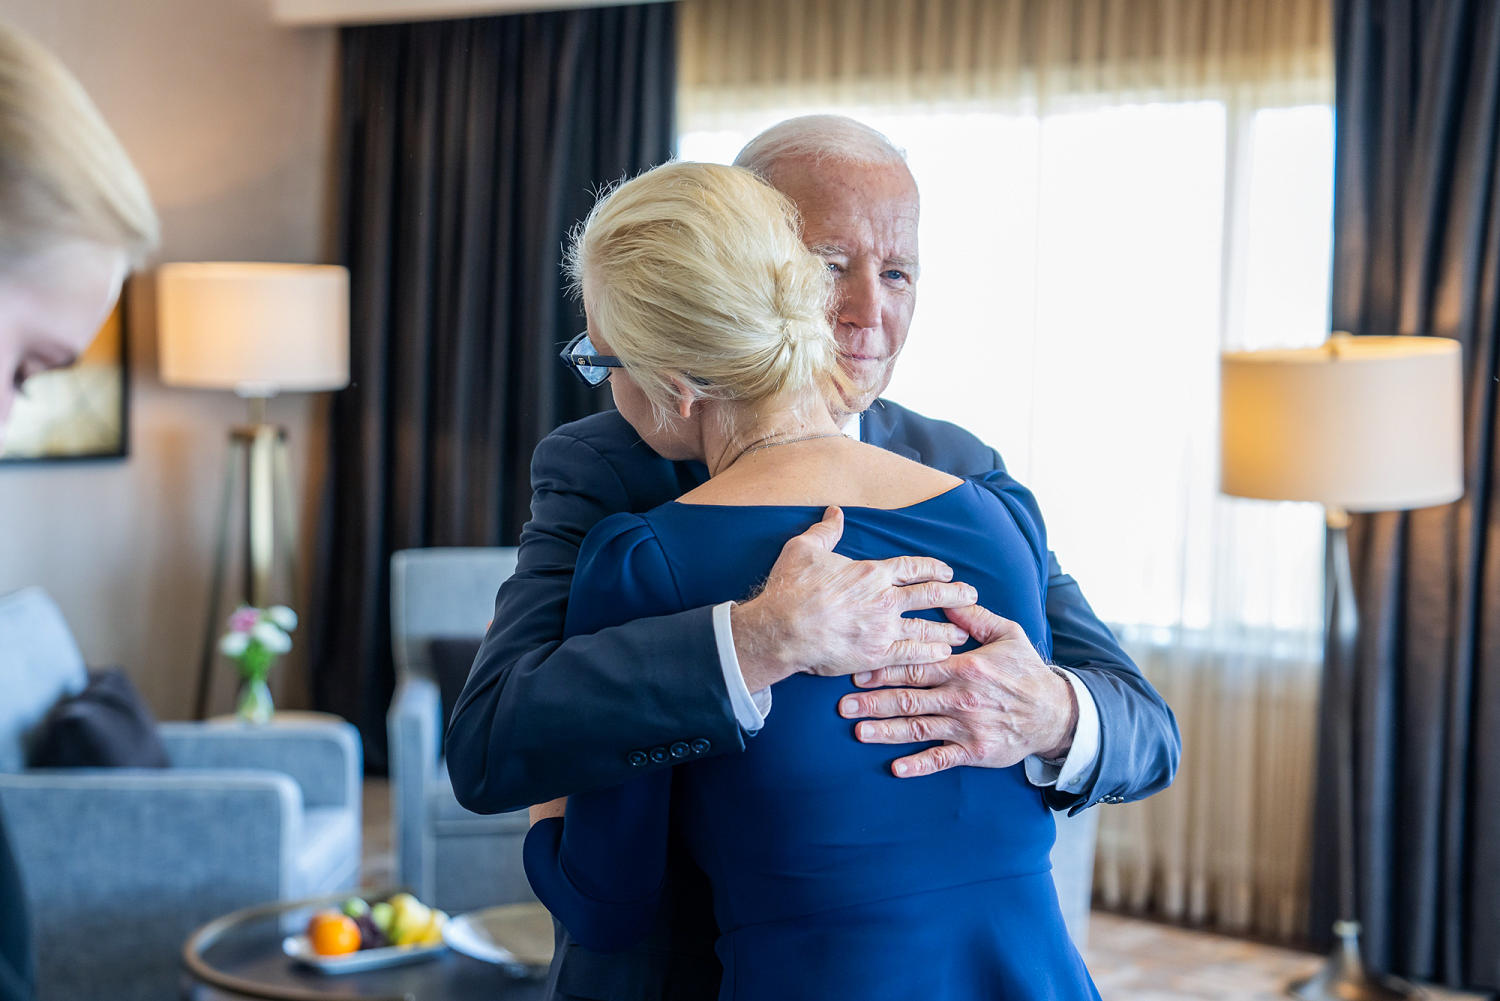 Biden vows to sanction Russia over Navalny's death in meeting with his widow and daughter